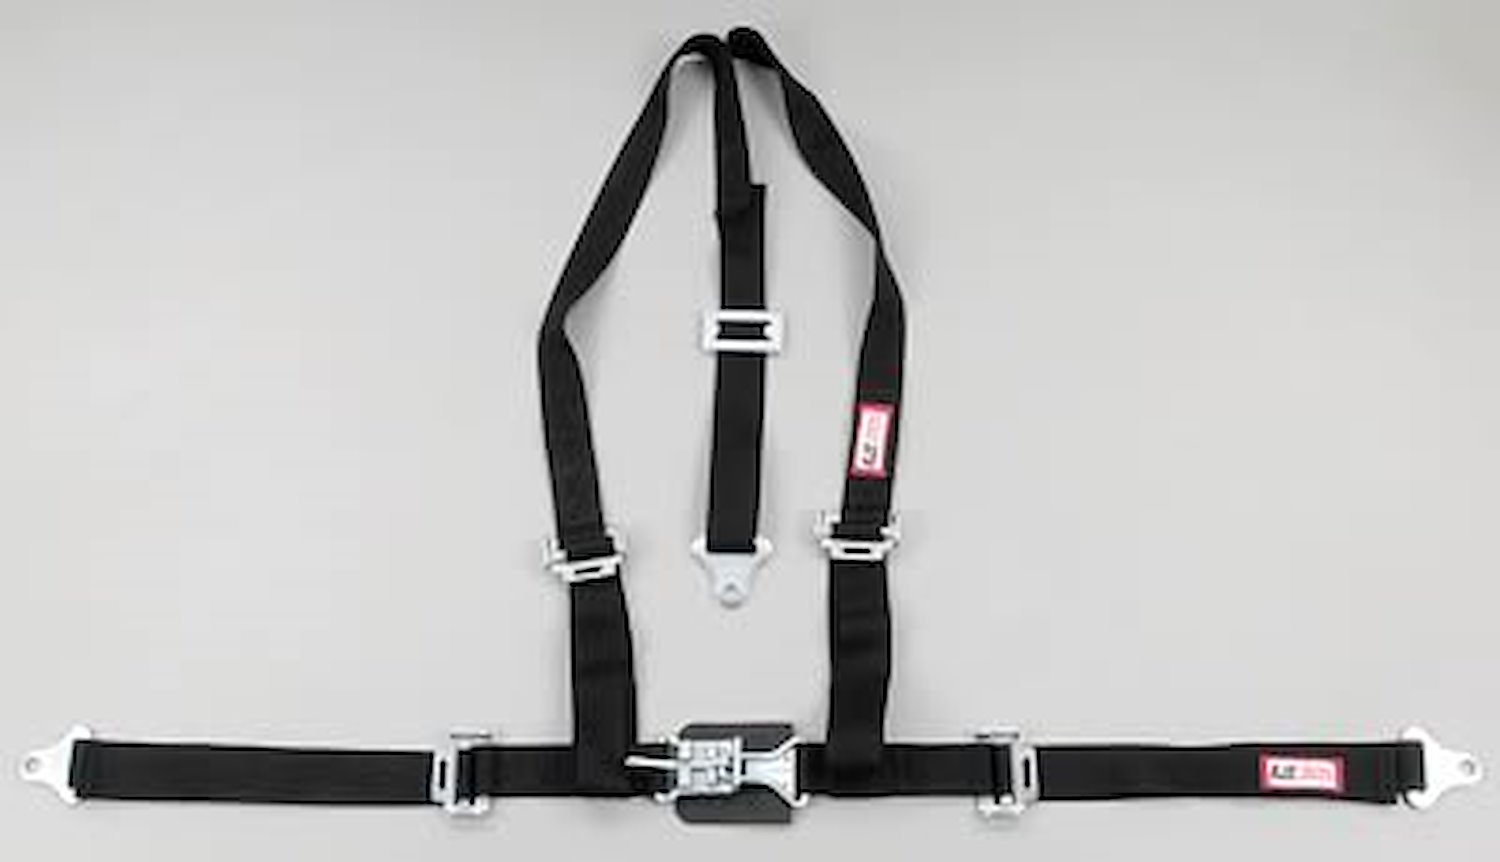 NON-SFI L&L HARNESS 2 PULL UP Lap Belt SNAP SEWN IN 2 S.H. INDIVIDUAL FLOOR Mount w/STERNUM STRAP WRAP/SNAP KHAKI